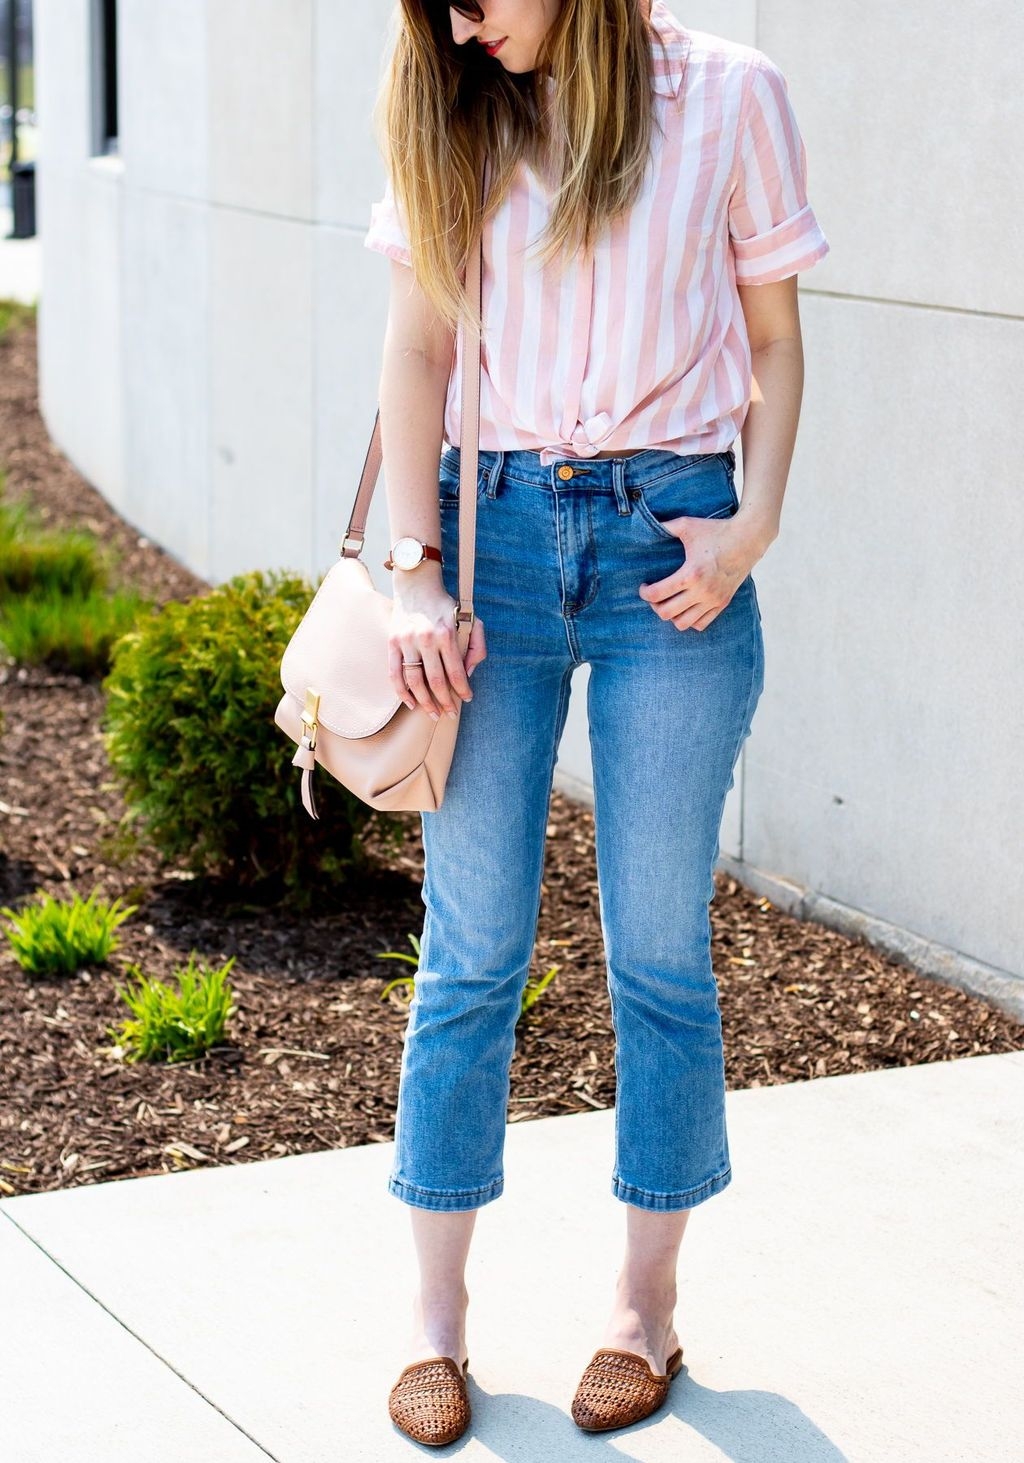 43 Latest Jeans Outfits Ideas For Spring - ADDICFASHION